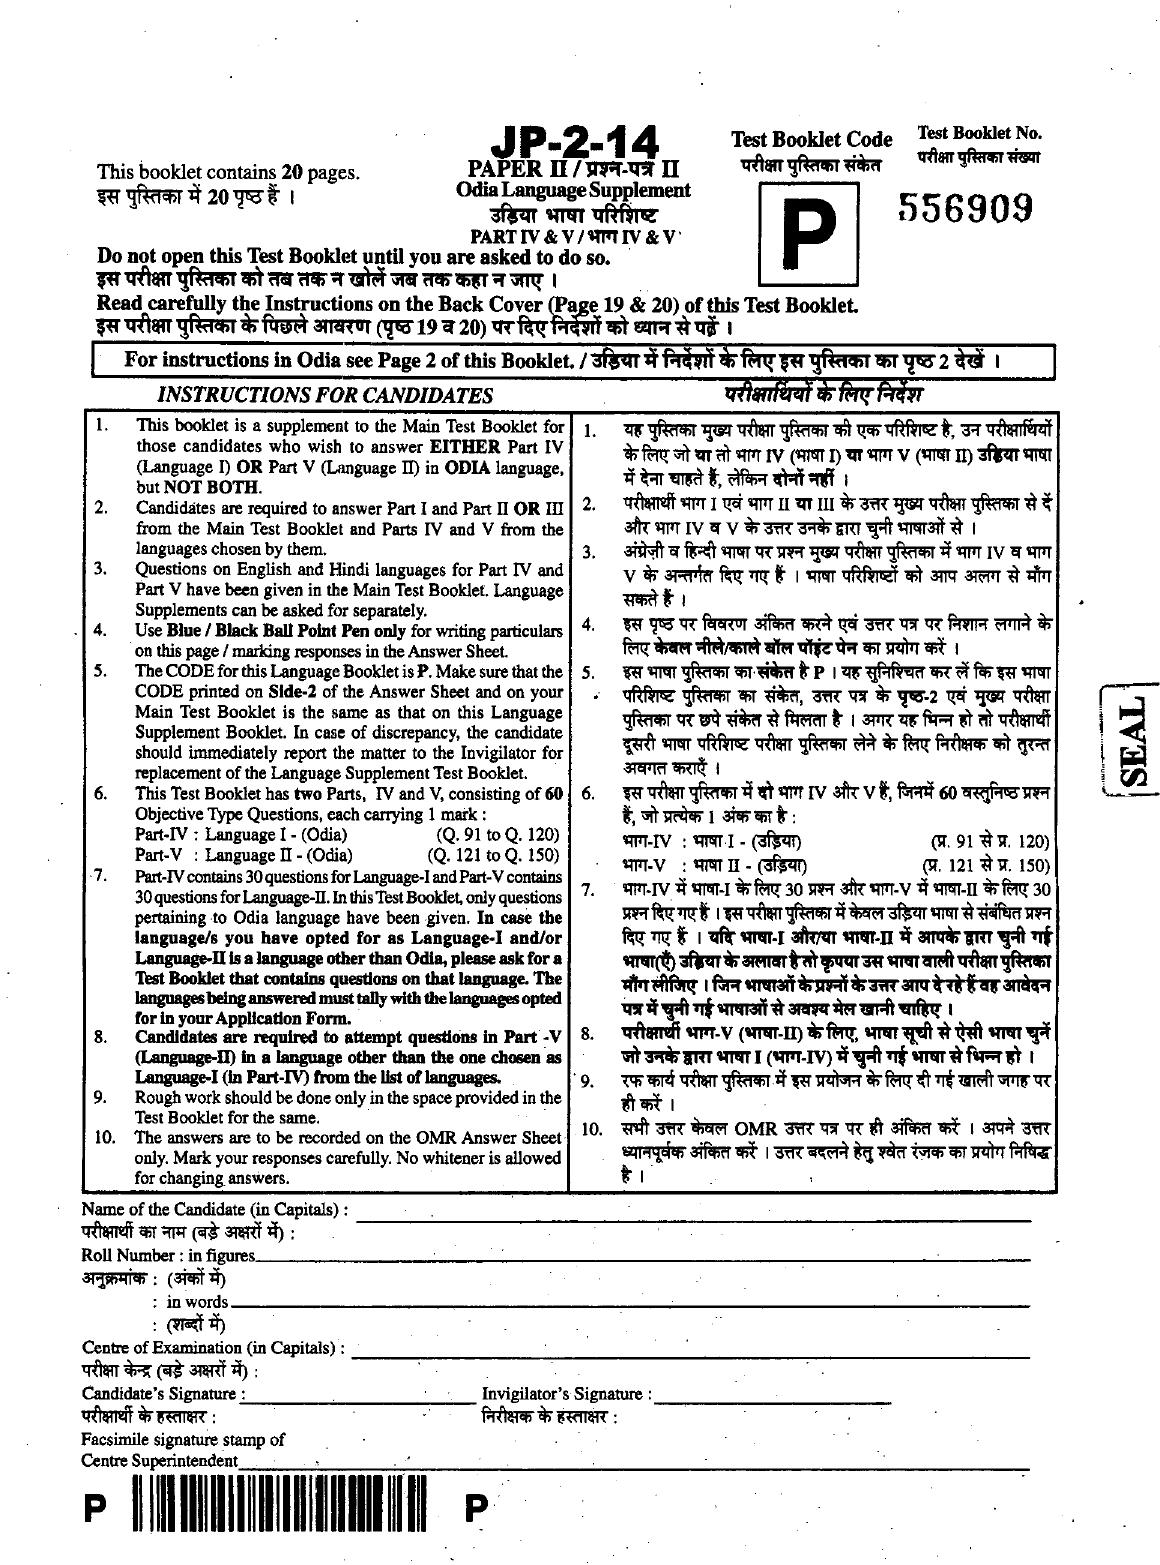 OSSSC Livestock Inspector Previous Question Paper - Odia - Page 1